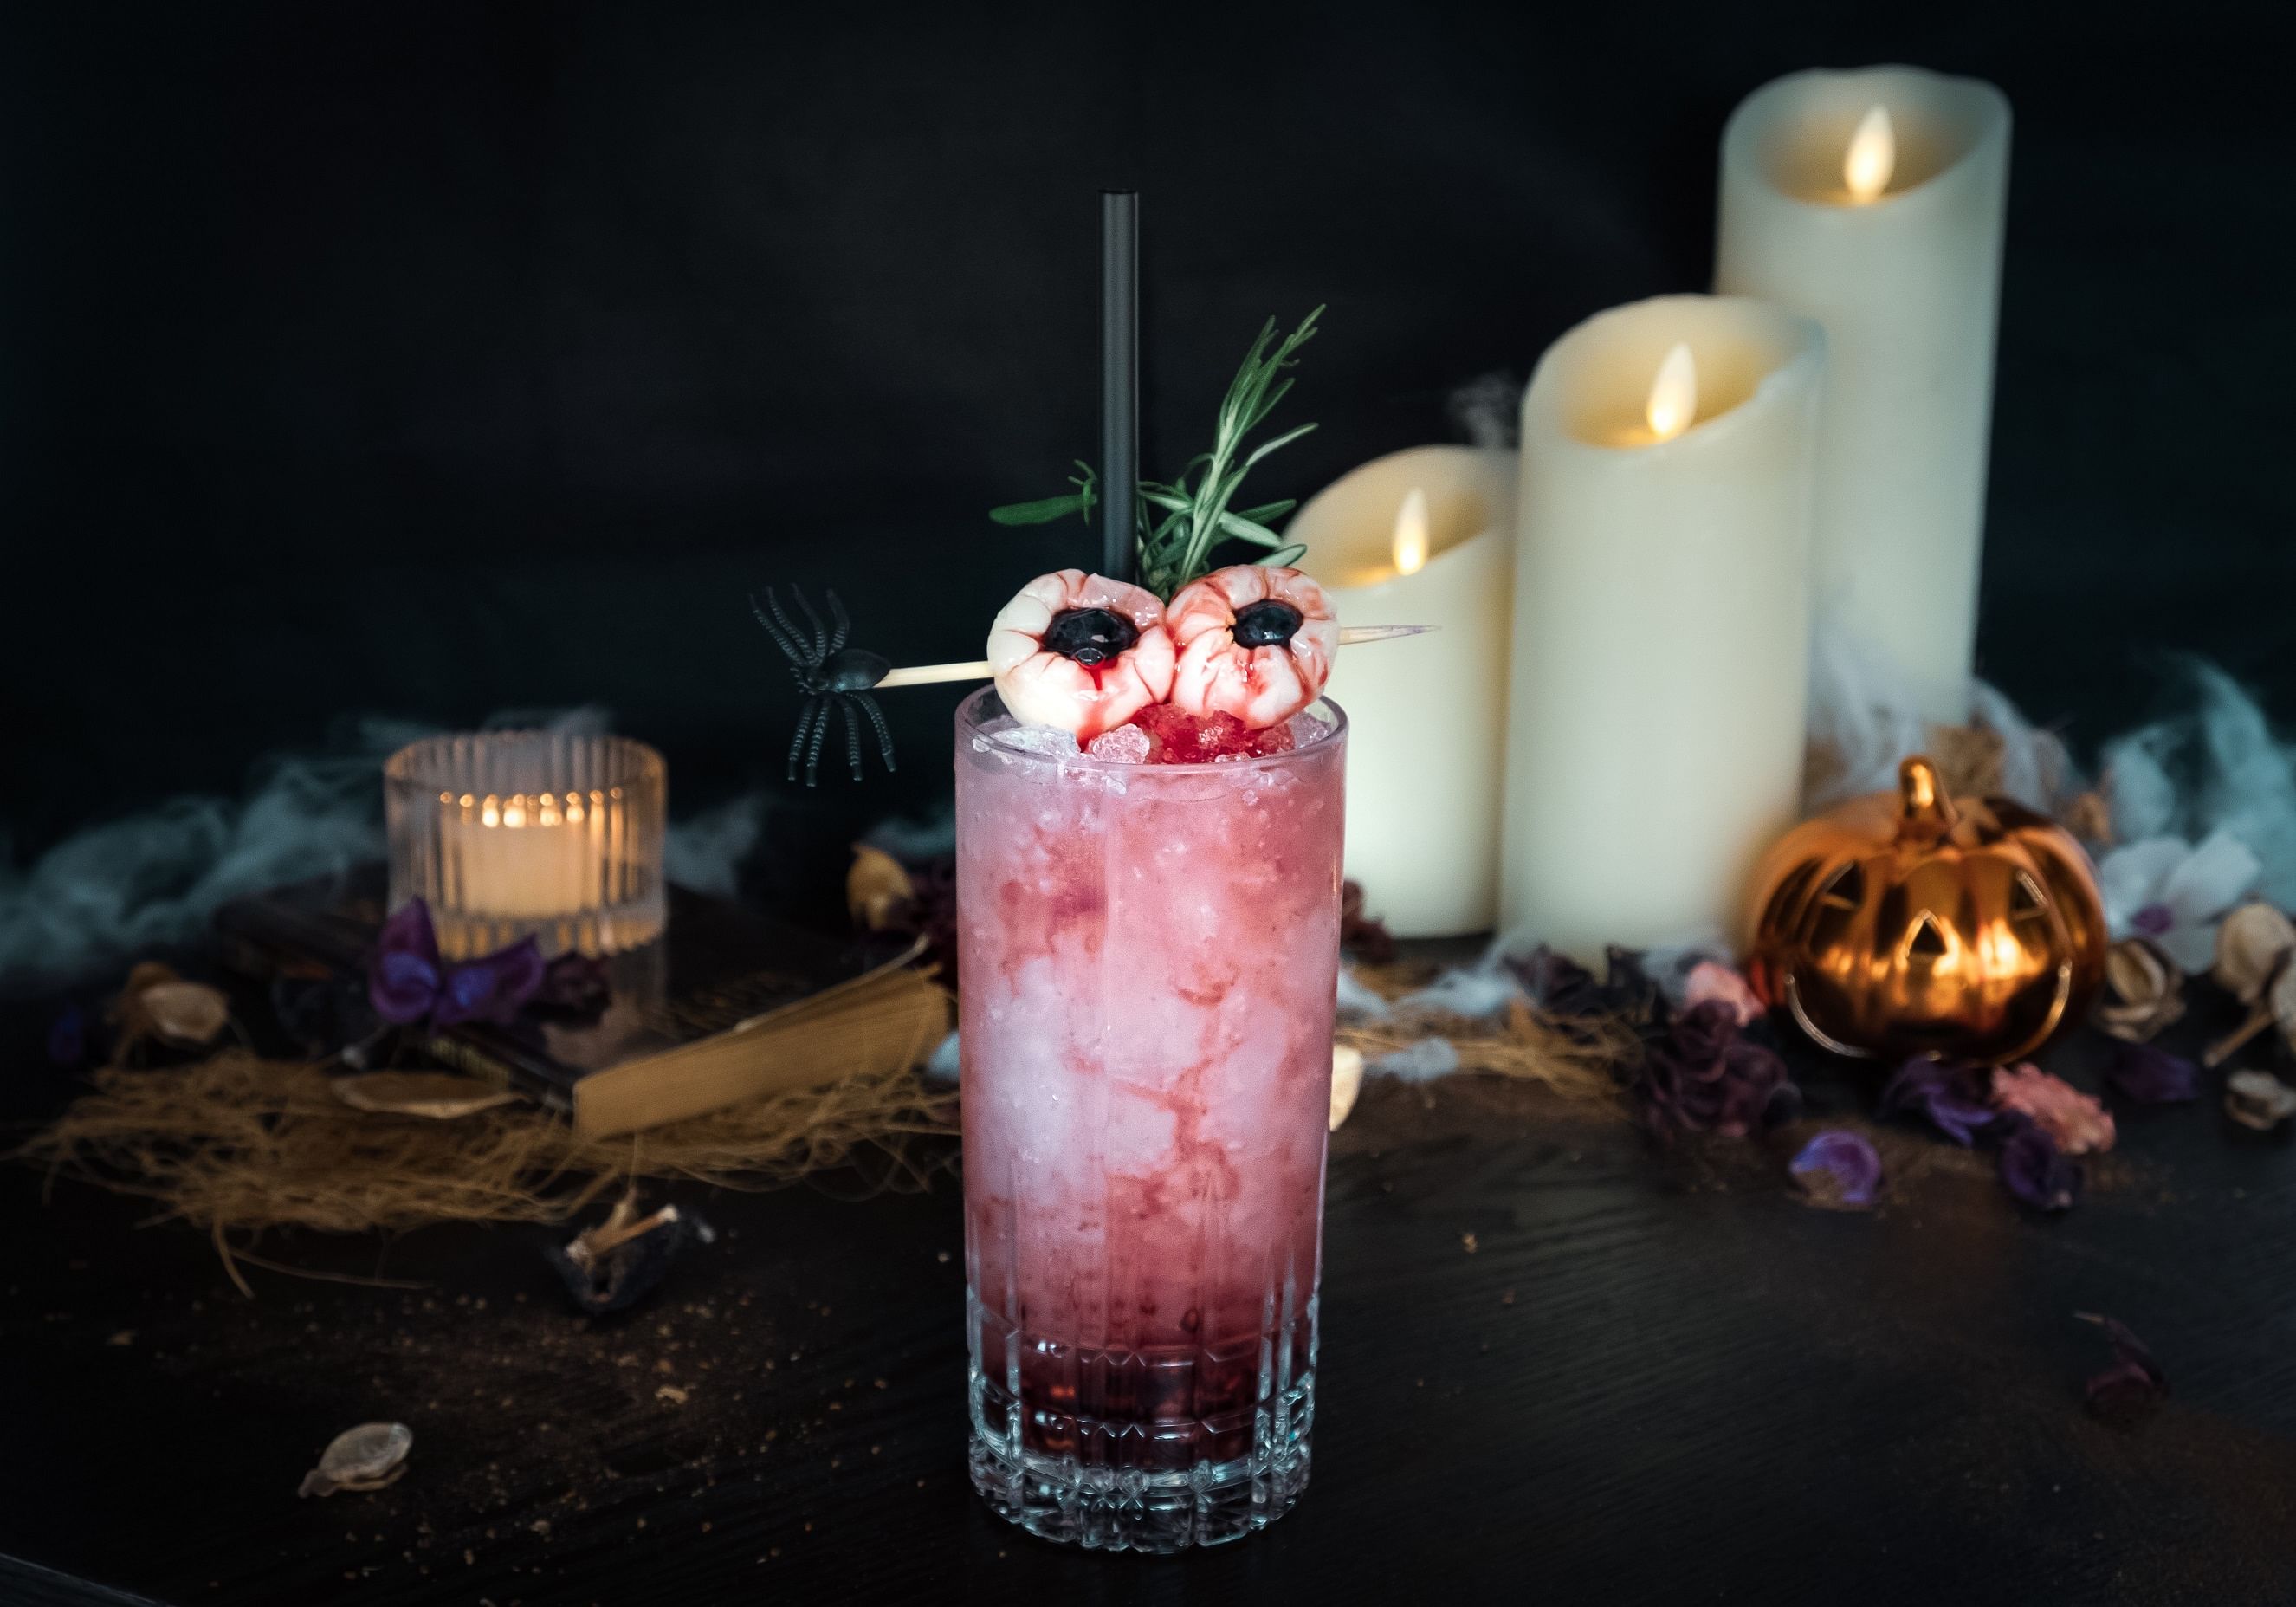 The best Halloween F&B places and parties in Singapore 